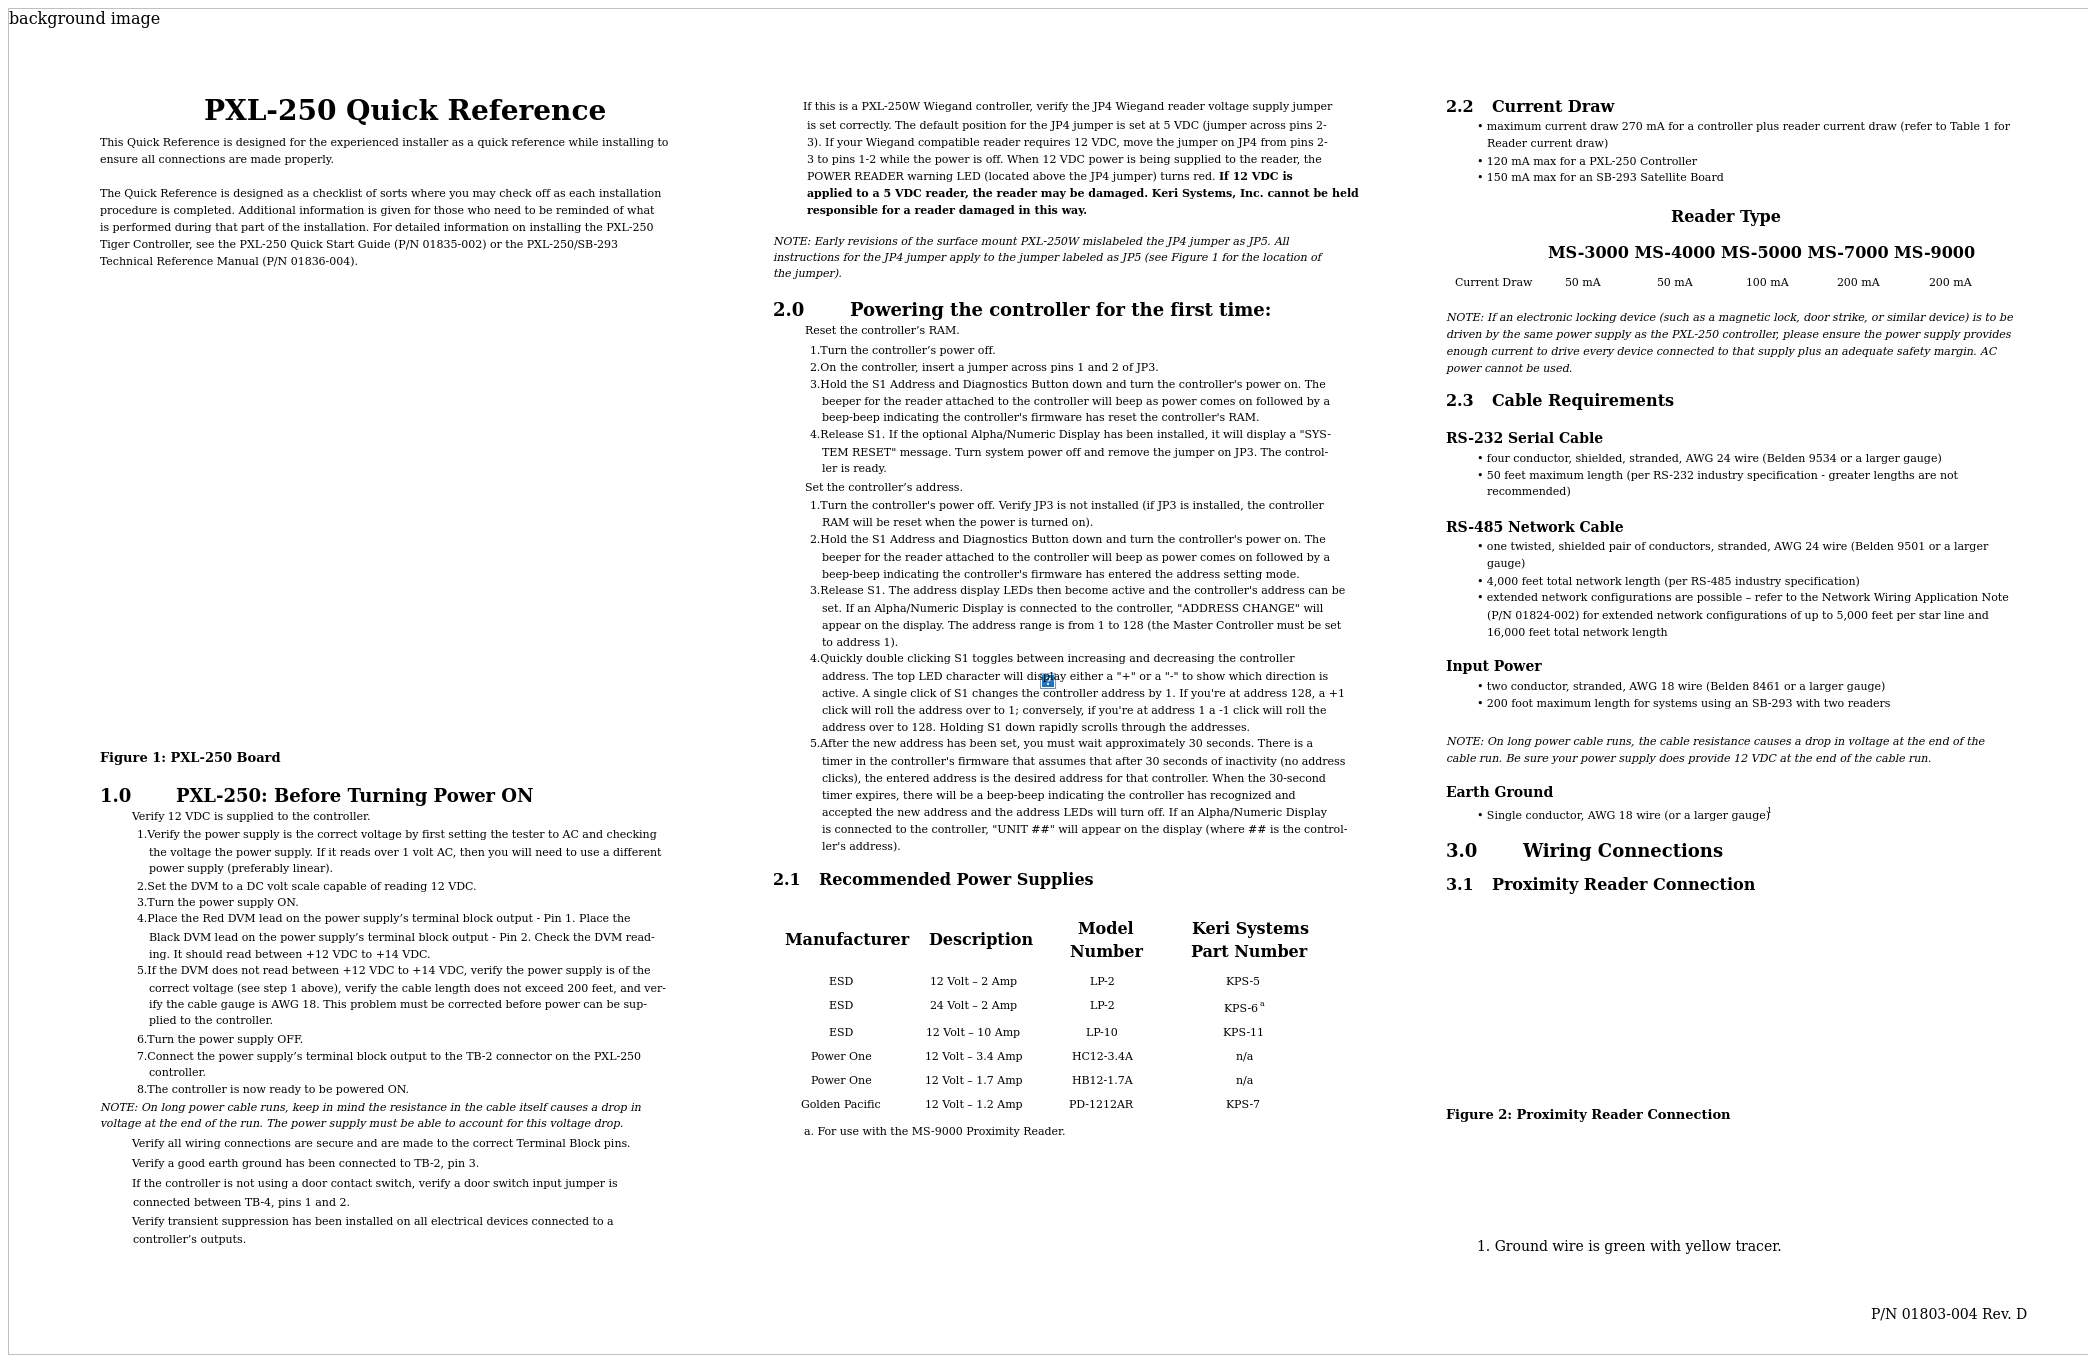 PXL-250 Quick Reference